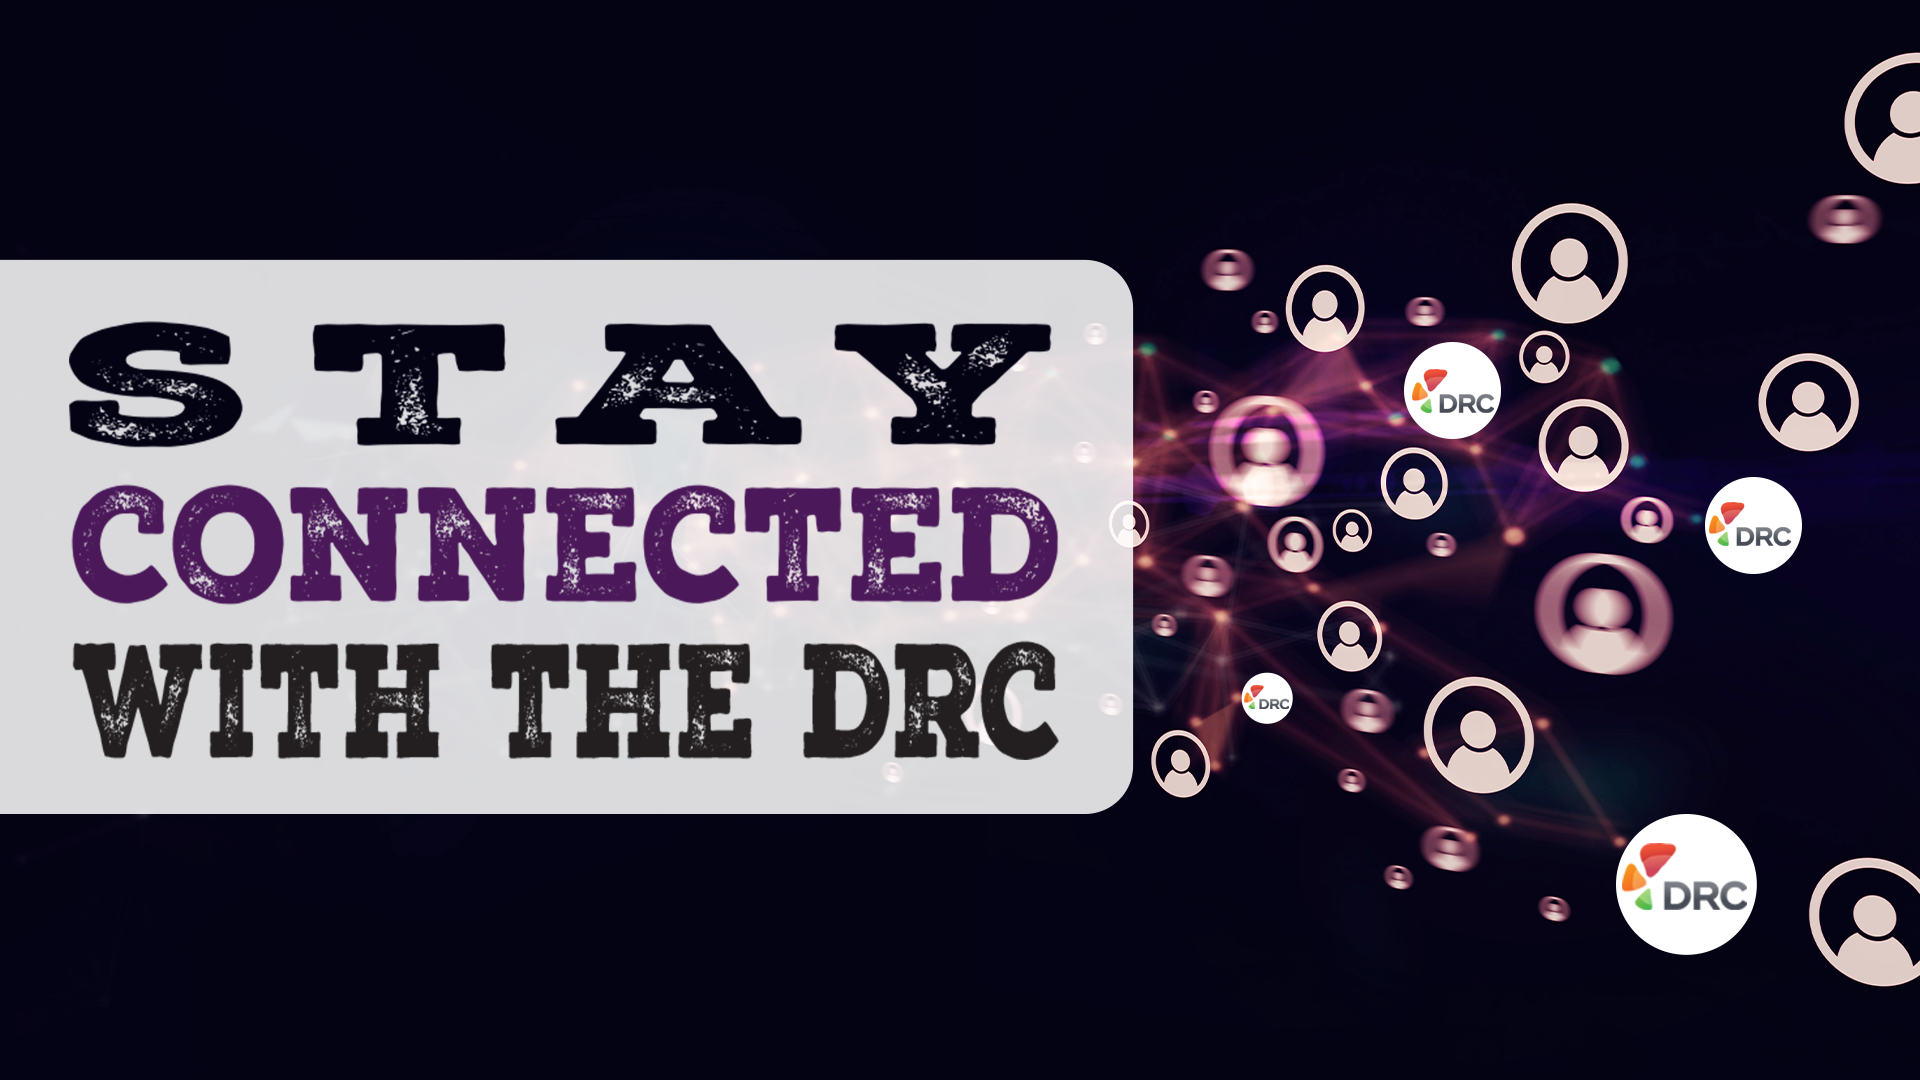 Stay connected with the DRC through Social Media.